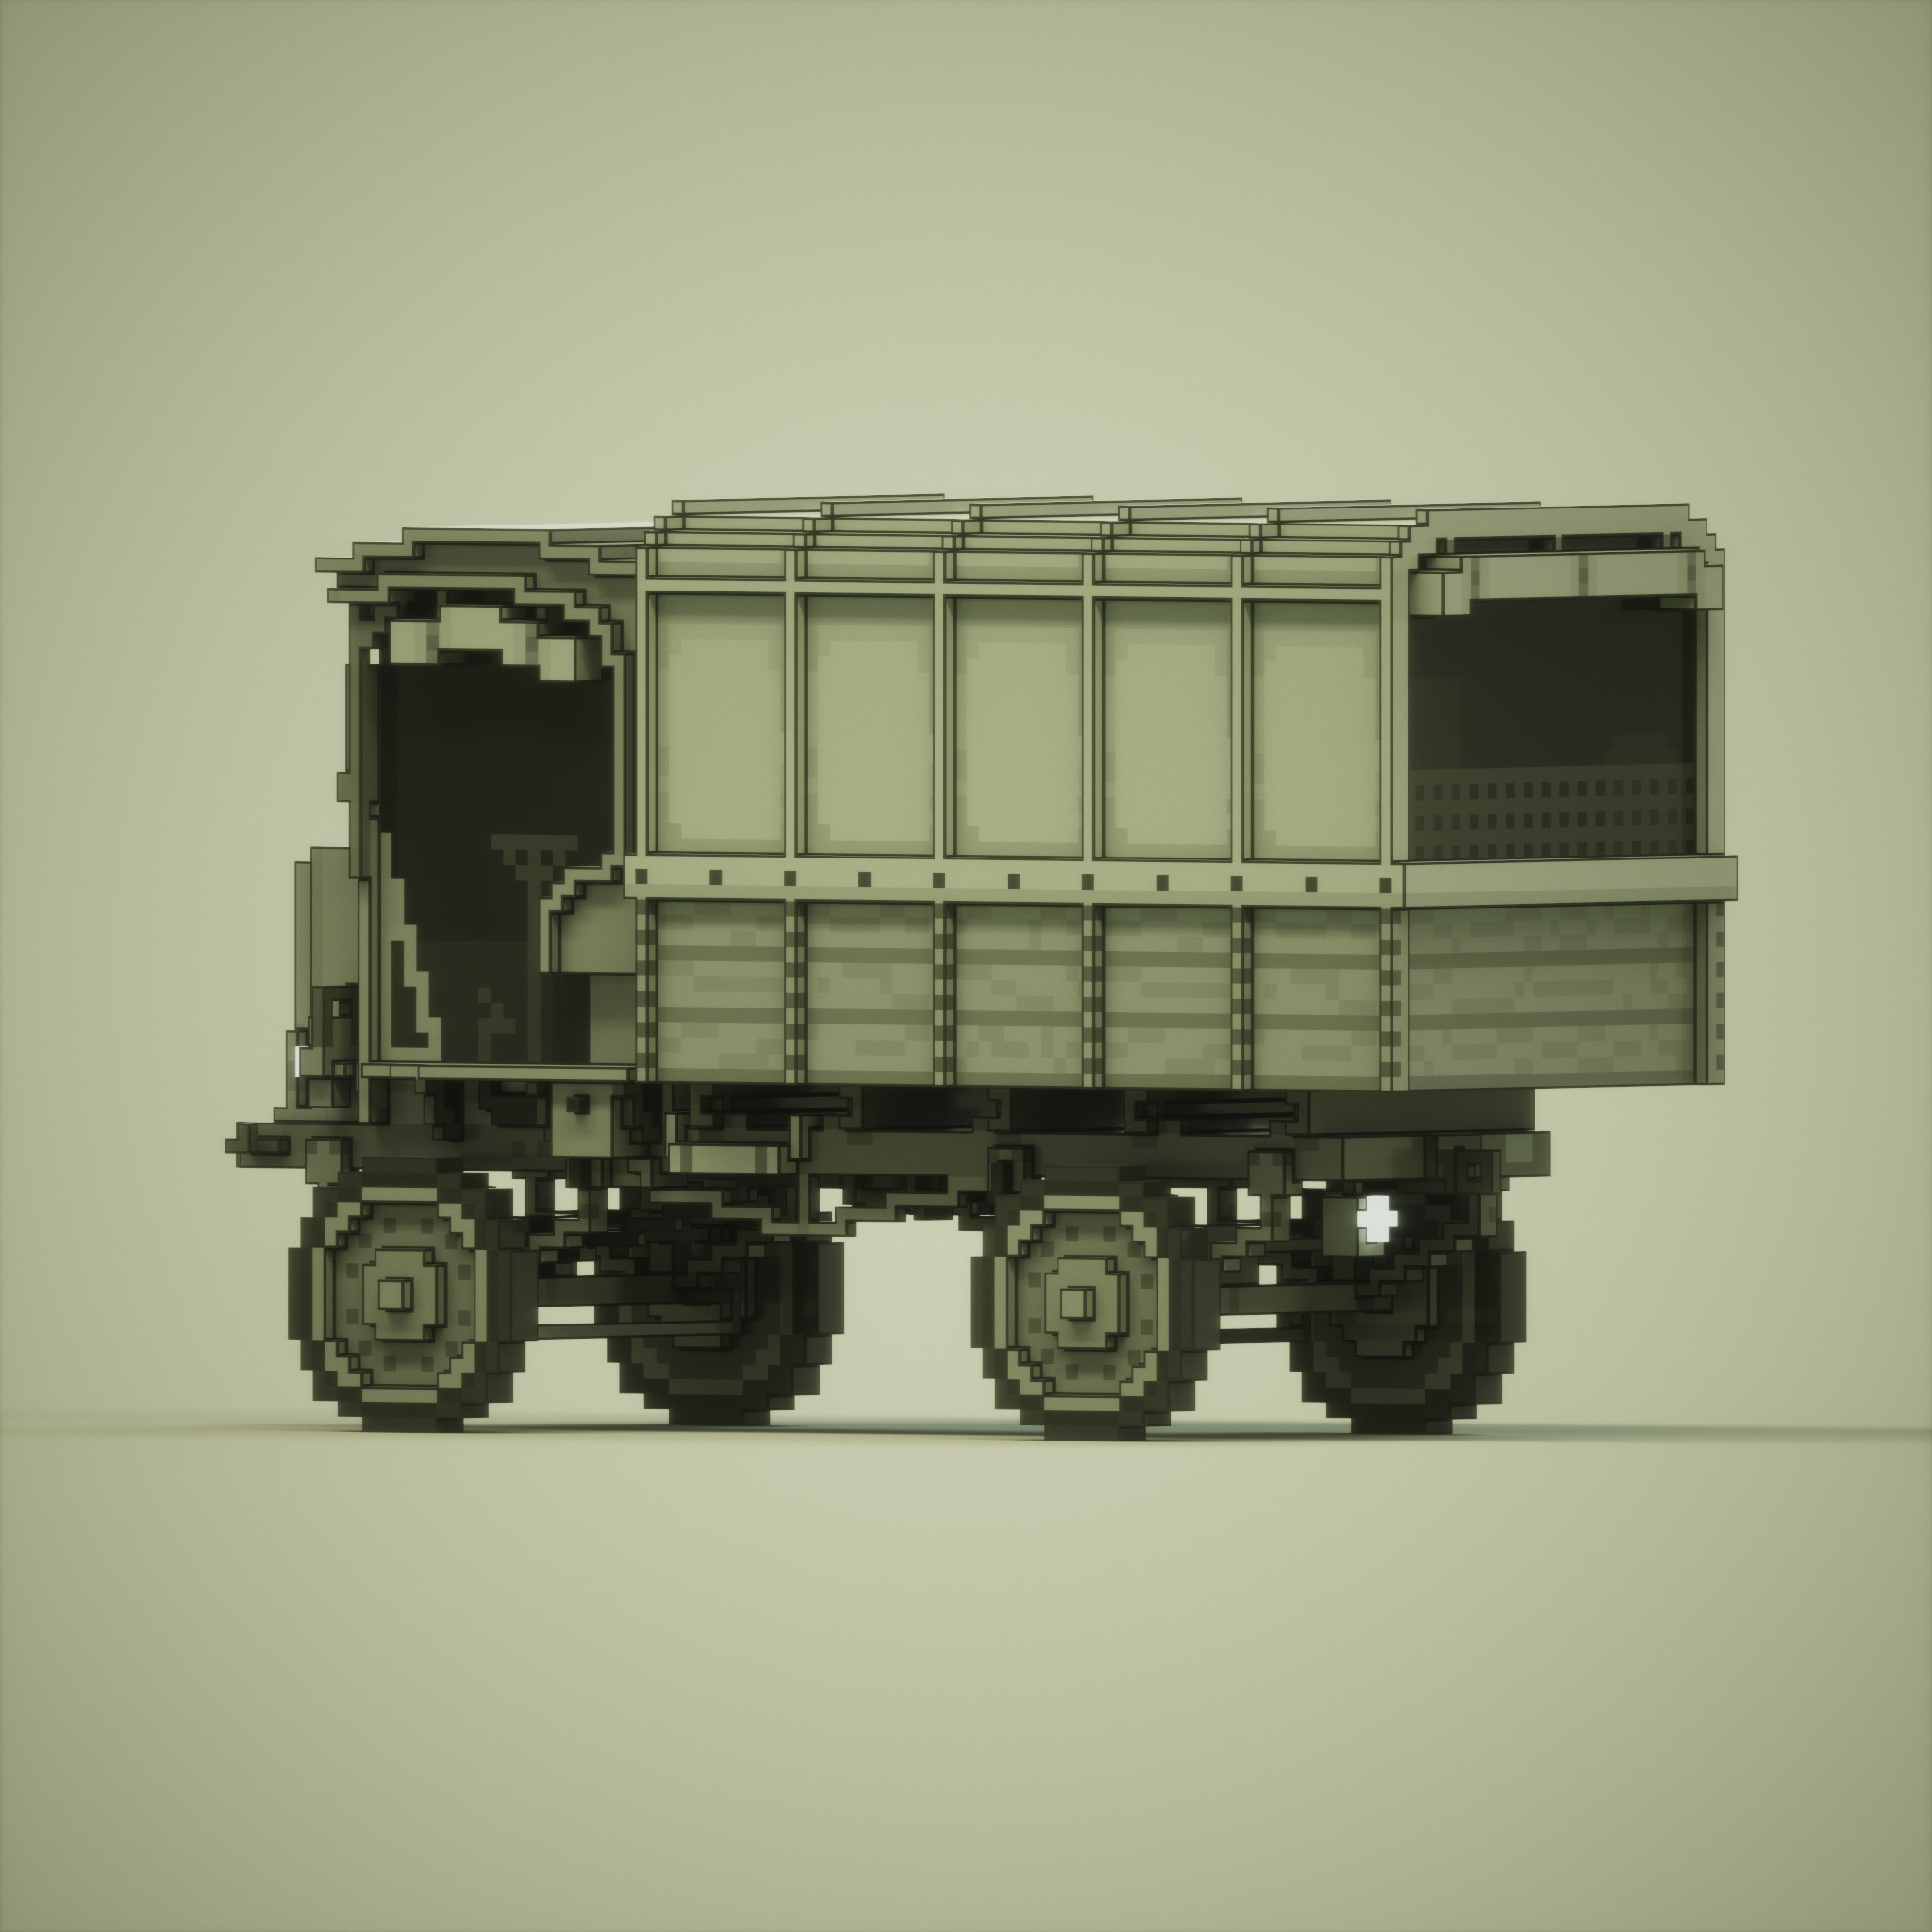 Flipped render of the voxel Jeffery \ Nash Quad truck detailing some of the rear carriage and frame work.